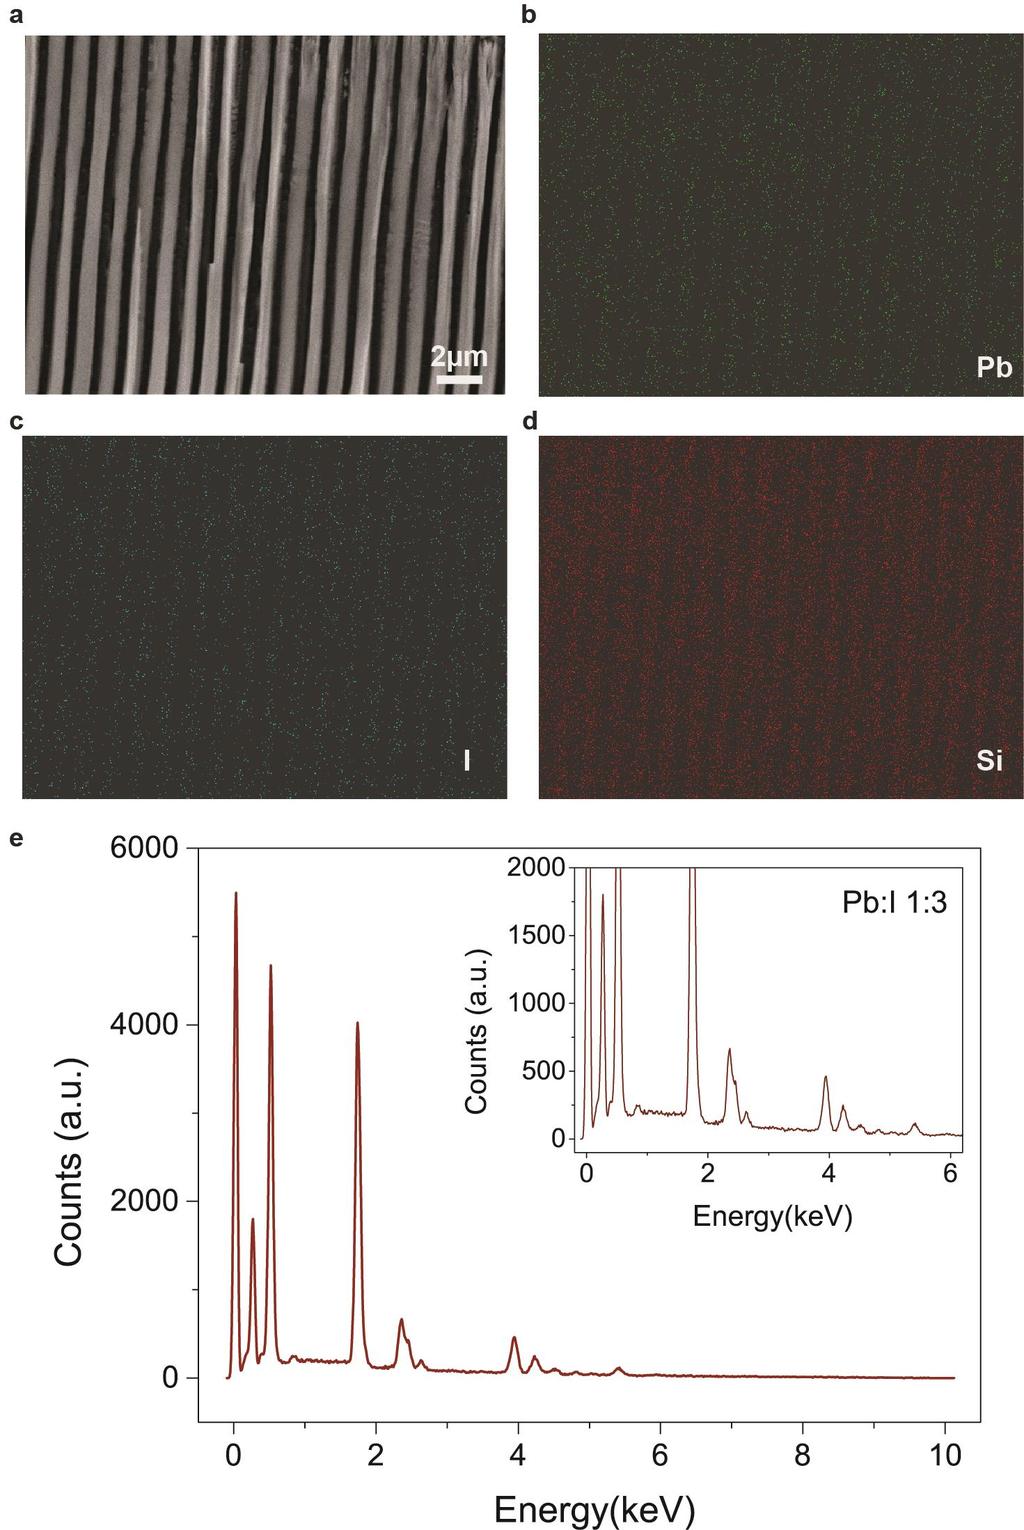 Fig. S3. SEM micrograph of set of MAPbI 3 nanowires synthesized in quartz nanogratings (a). EDX window integral maps of Pb (b), I (c) and Si (d).